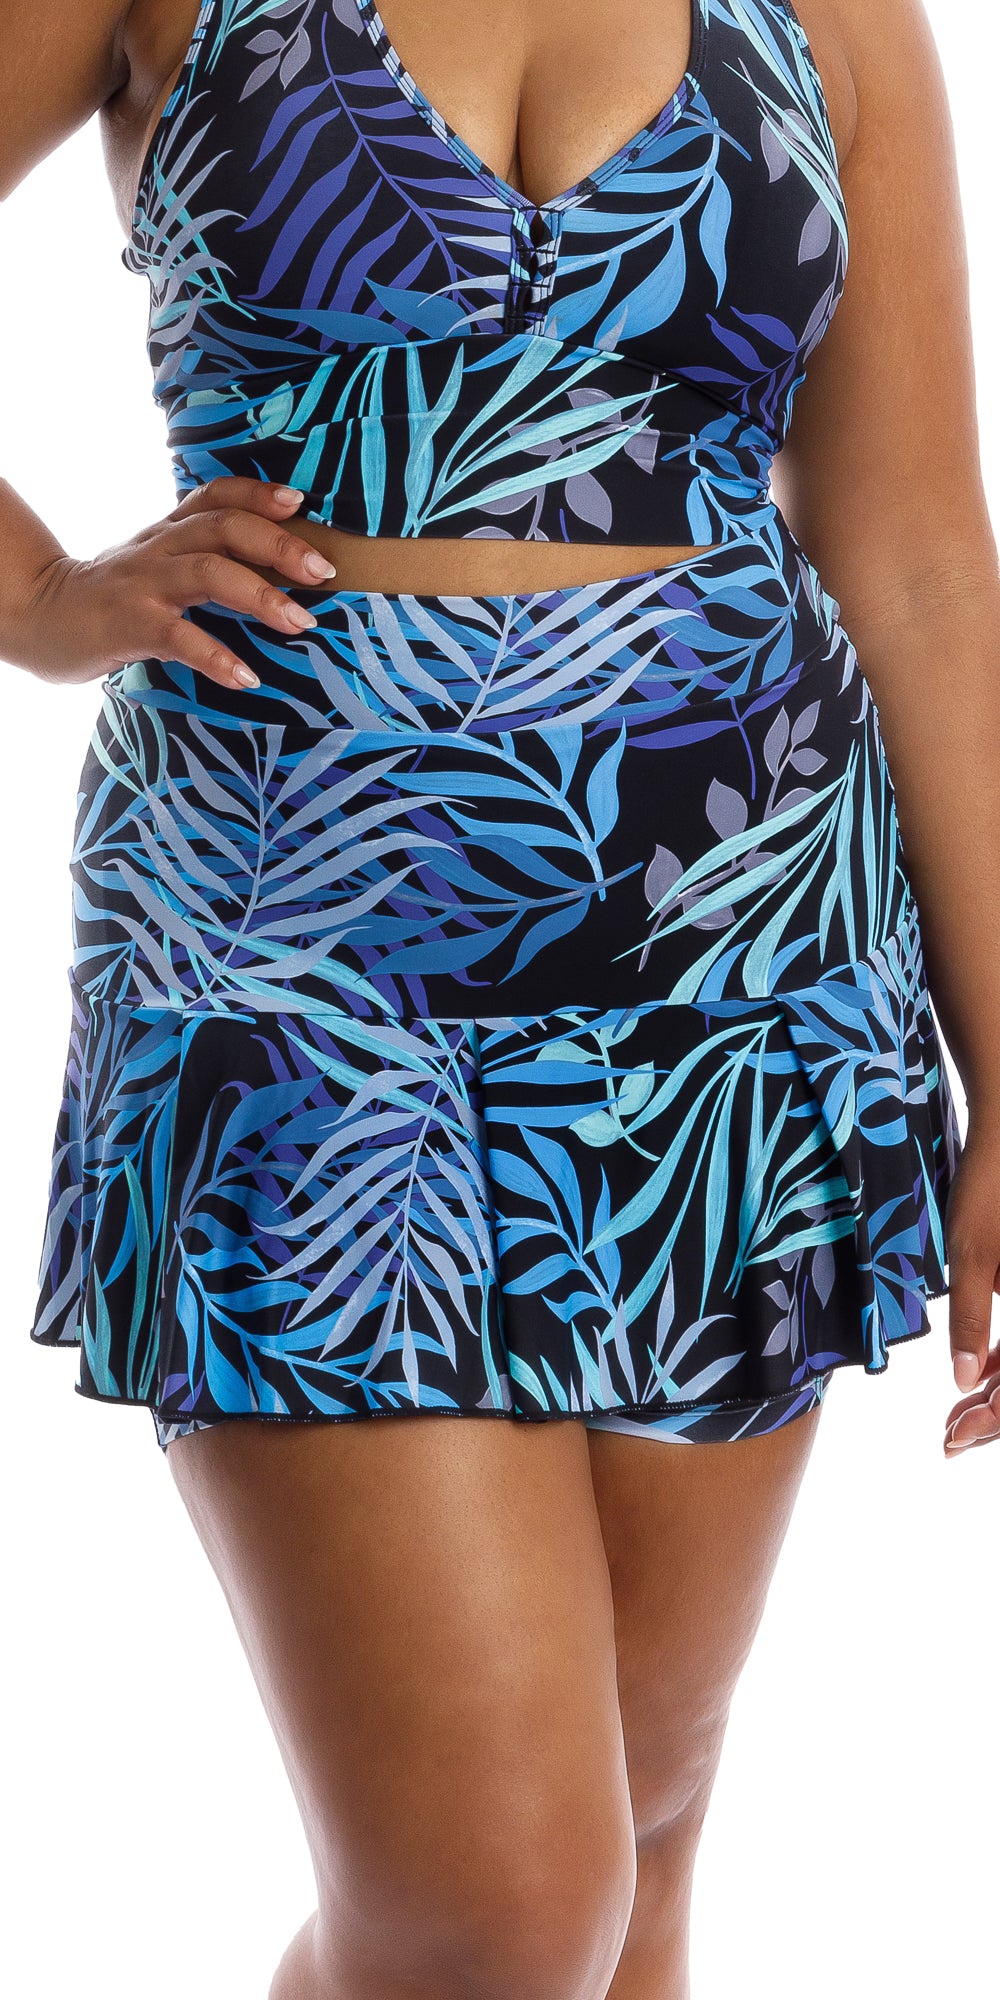 Front view of lady in blue and black Tropical Palm Skort and matching bra putting one hand on waist